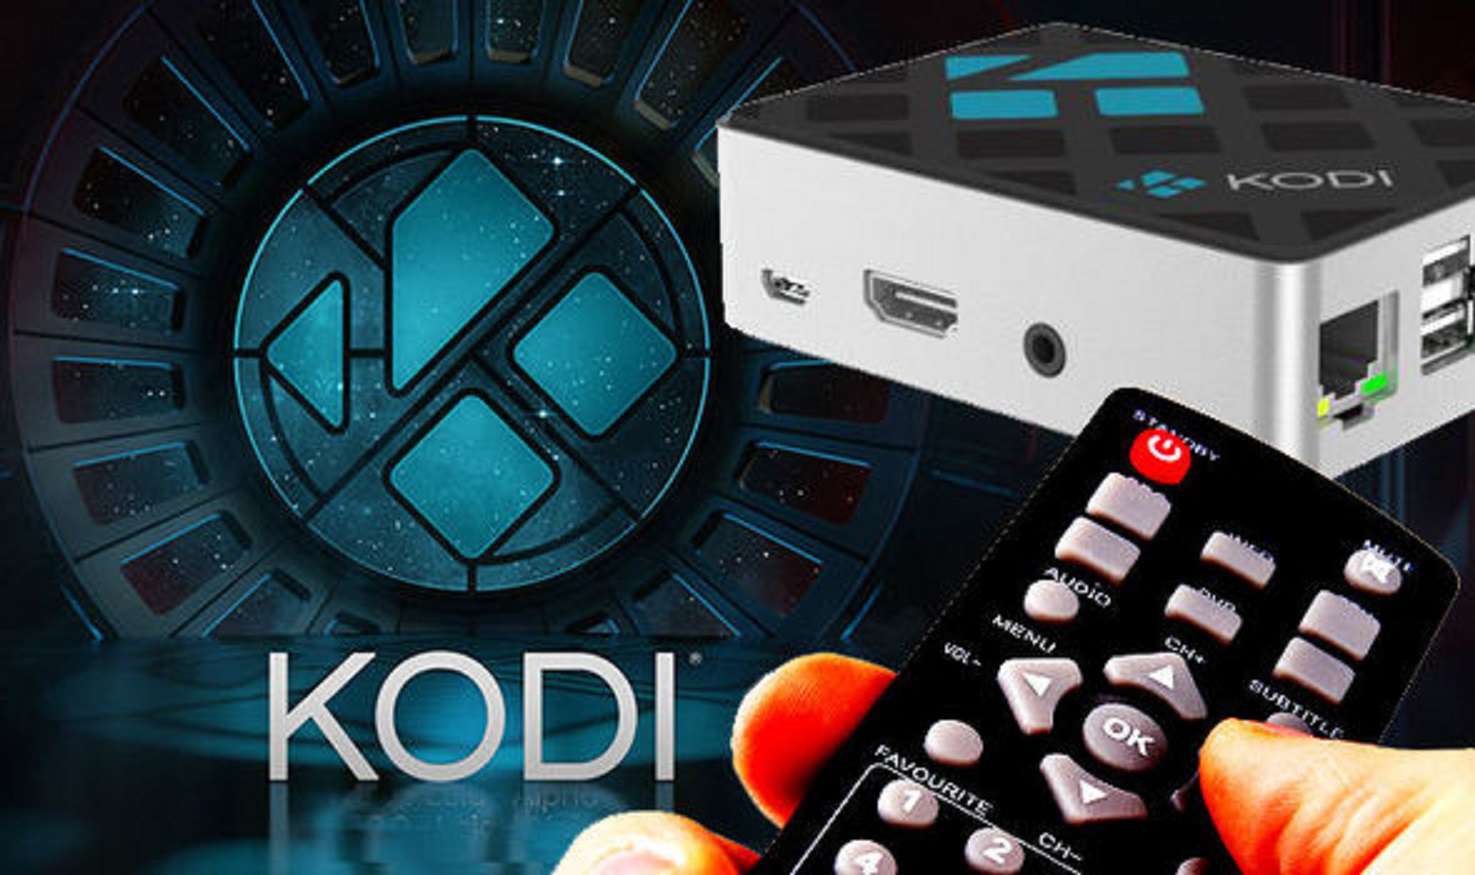 Taboola Ad Example 38311 - Kodi Users - Use This Tool To Access New Titles